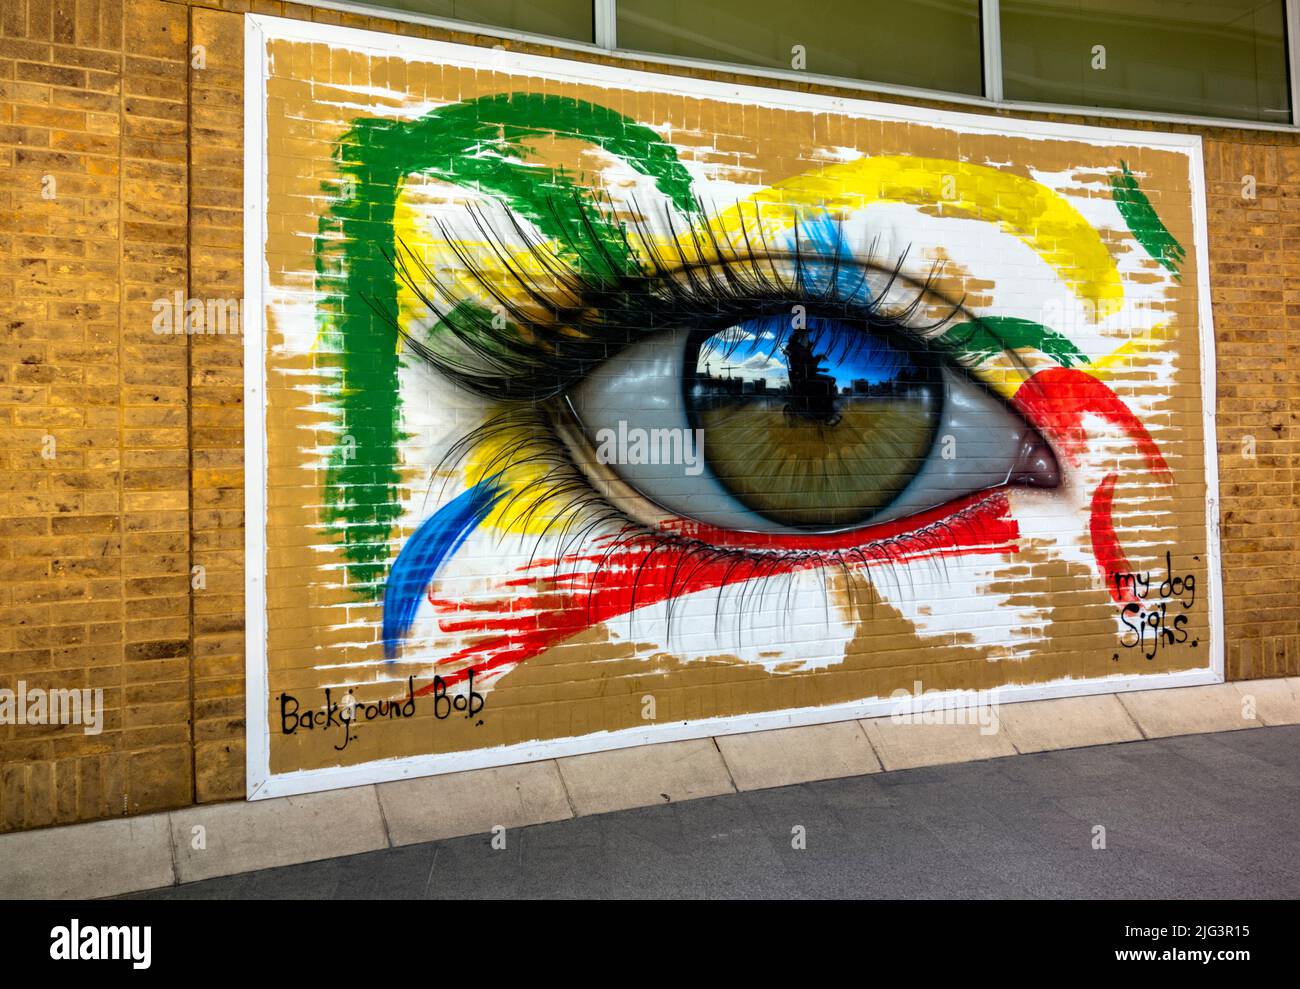 Creative street mural featuring iris of an eye by Background Bob and My Dog Sighs, Southampton Westquay UK Stock Photo